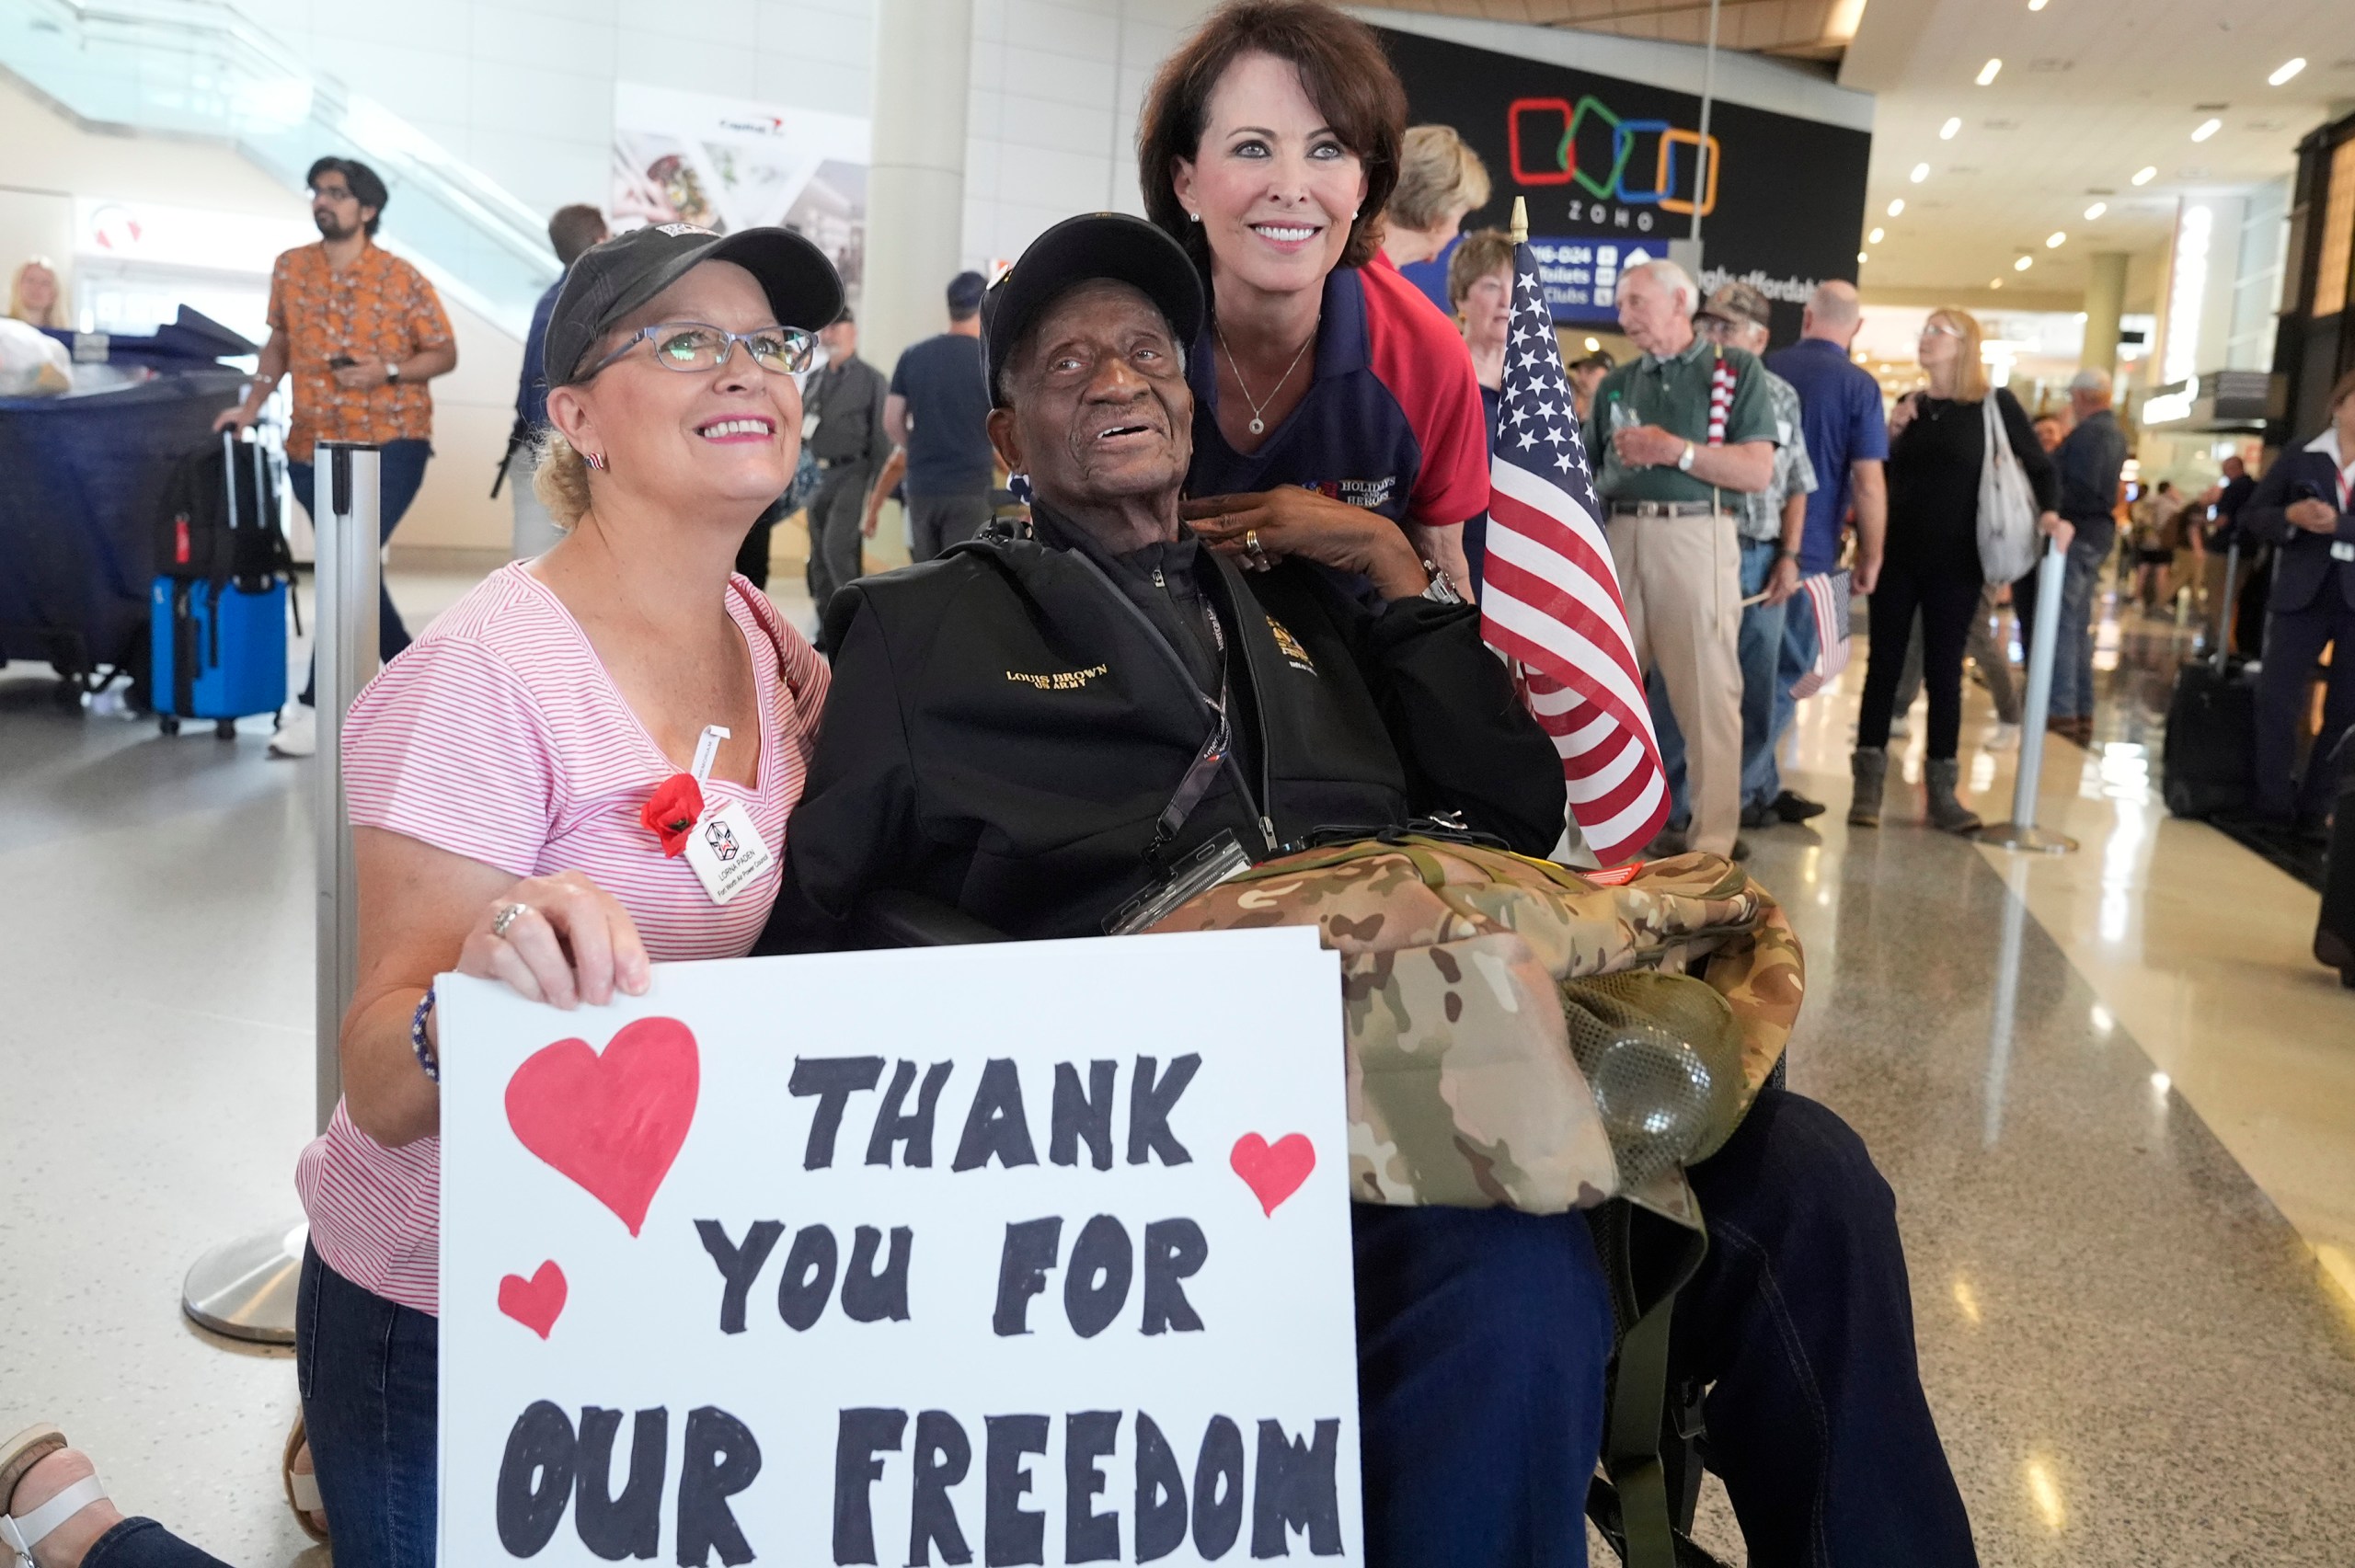 World War II veteran Louis Brown, center, poses for photos with Lorna Paden, left, and Kerre Randel before heading to board a flight with other veterans at Dallas Fort Worth International Airport in Dallas Friday, May 31, 2024. A group of World War II veterans are being flown from Texas to France where they will take part in ceremonies marking the 80th anniversary of D-Day. (AP Photo/LM Otero)